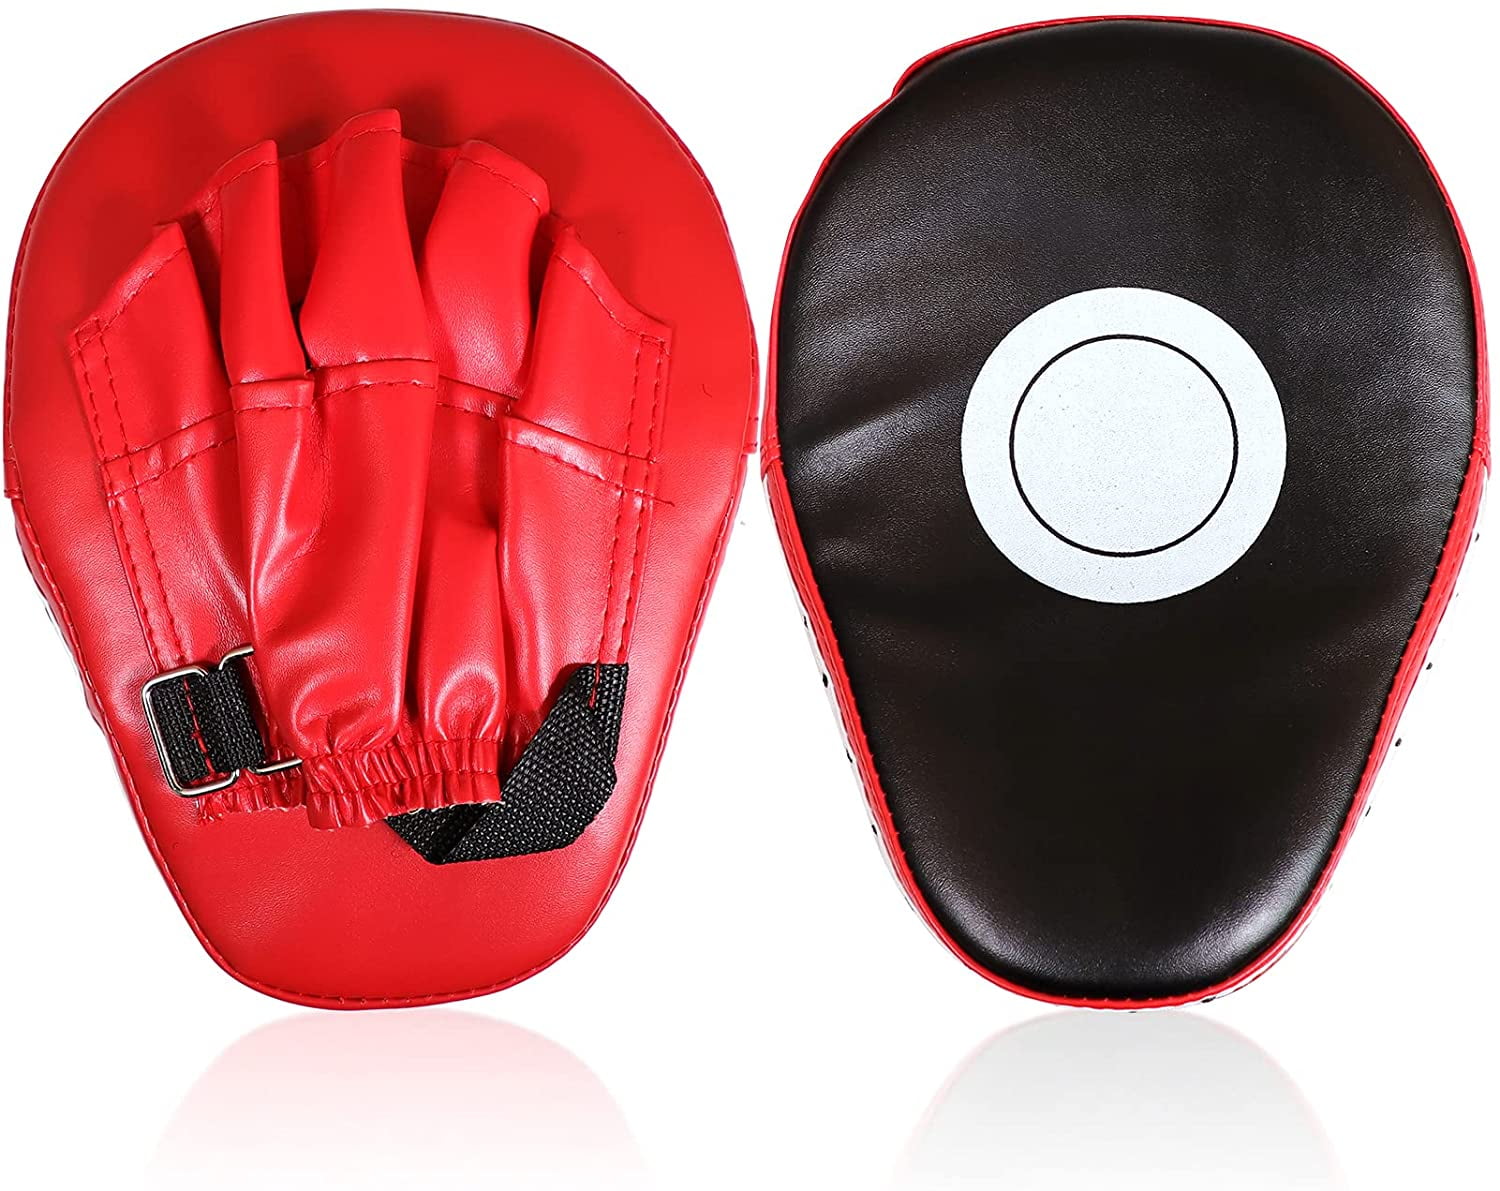 Curved Hand Target Glove For Karate Muay Thai Training Gift 